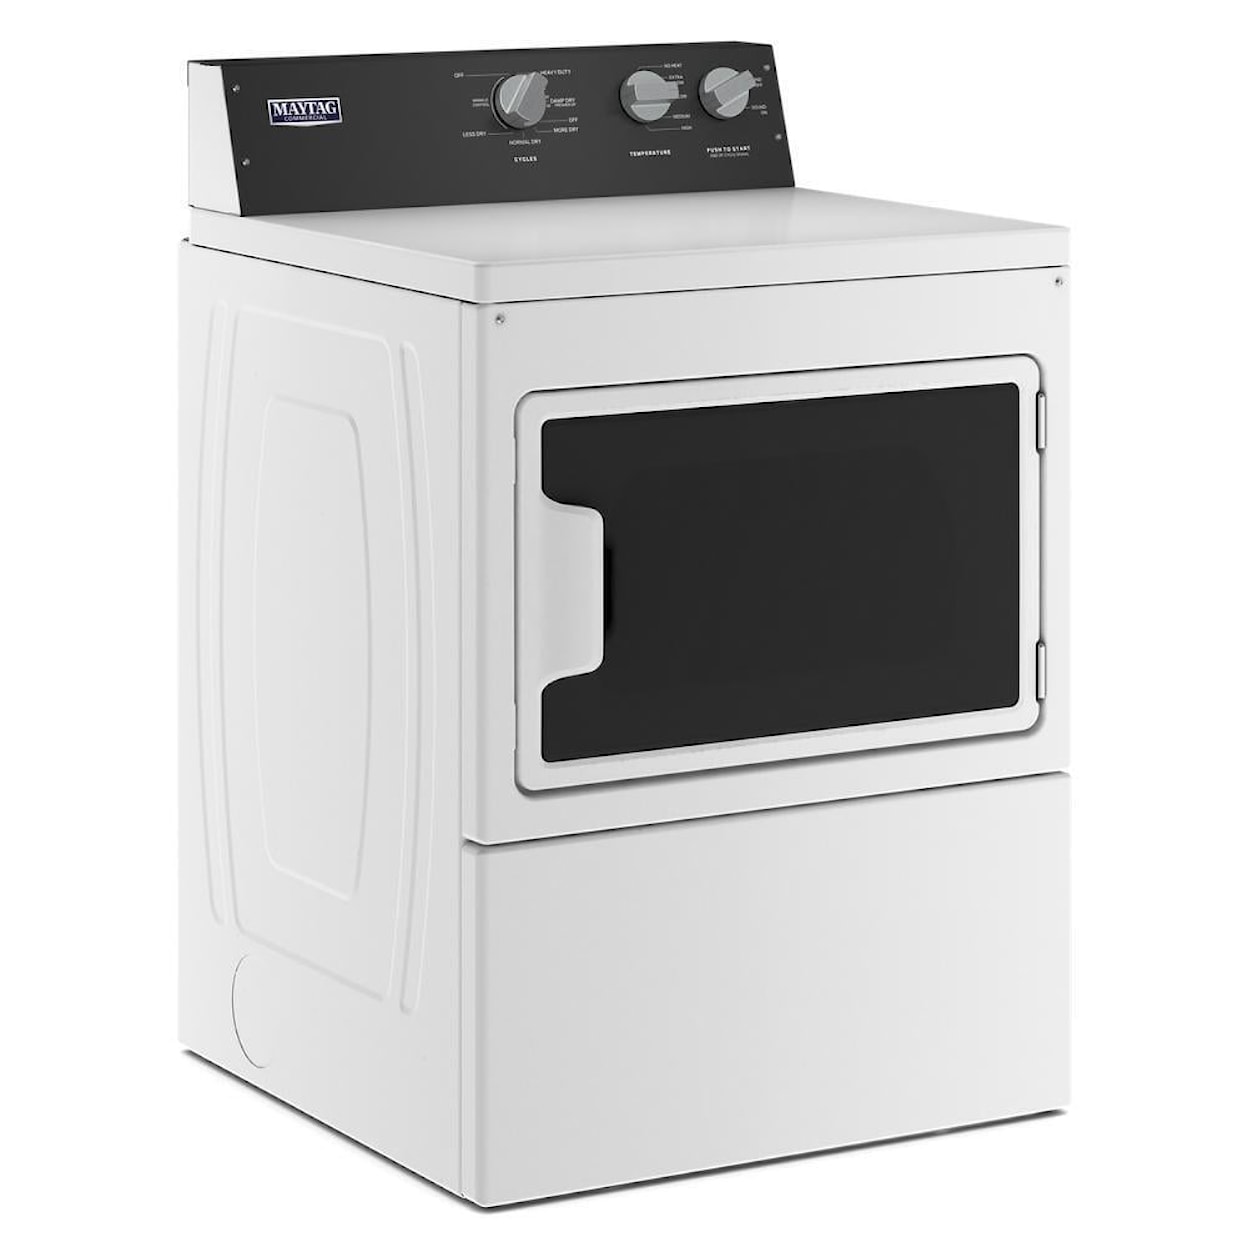 Maytag Laundry Front Load Gas Dryer